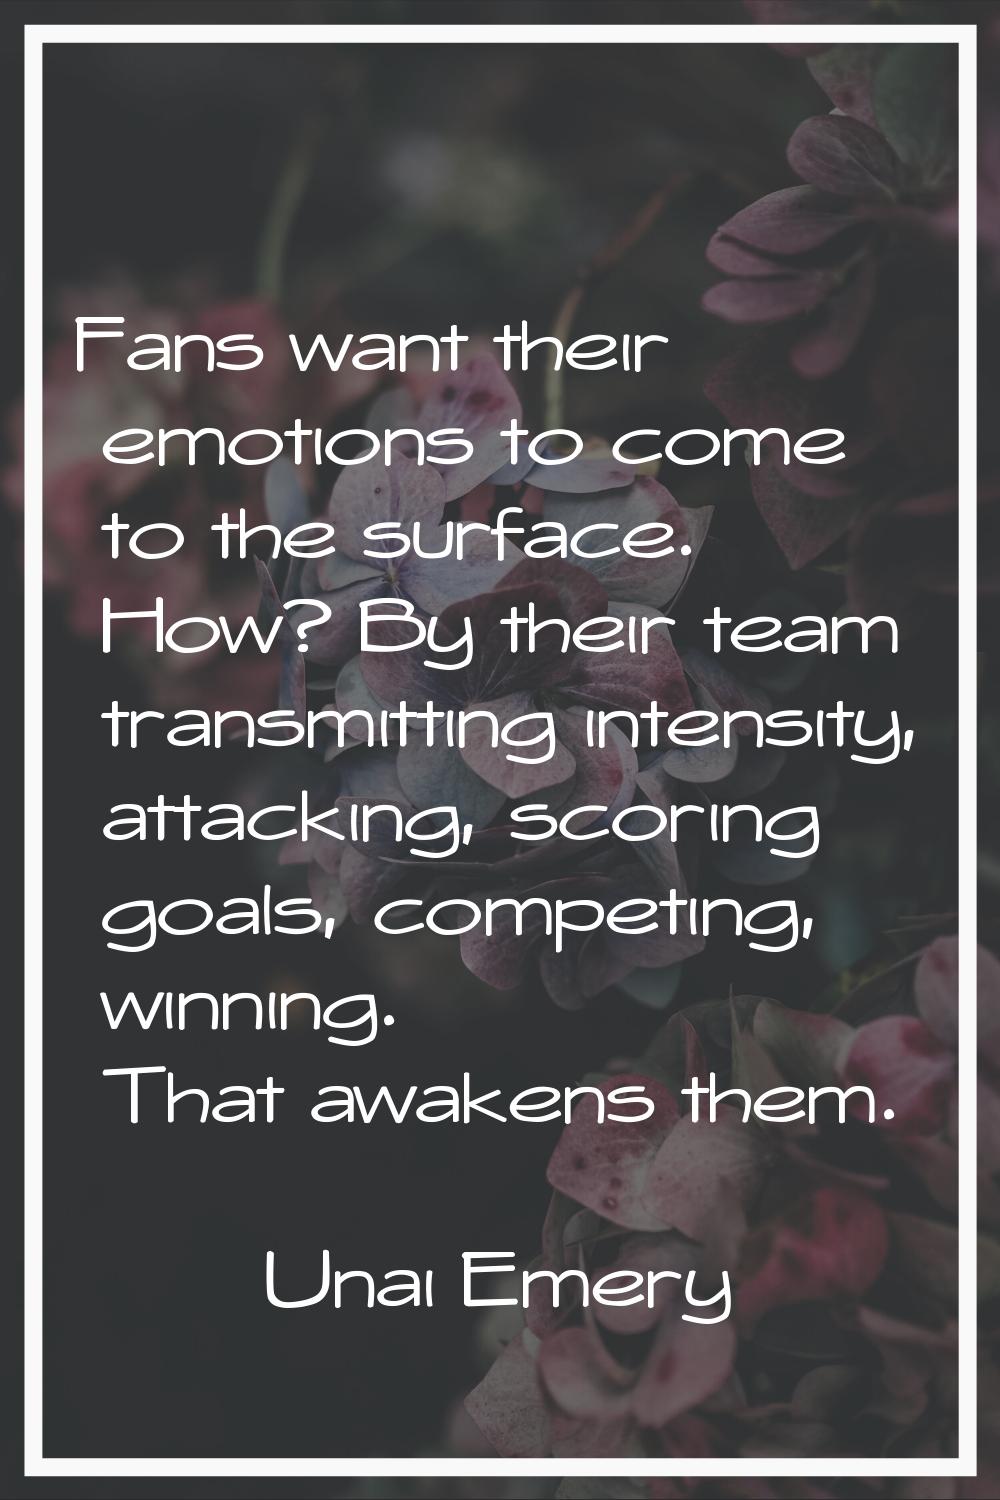 Fans want their emotions to come to the surface. How? By their team transmitting intensity, attacki